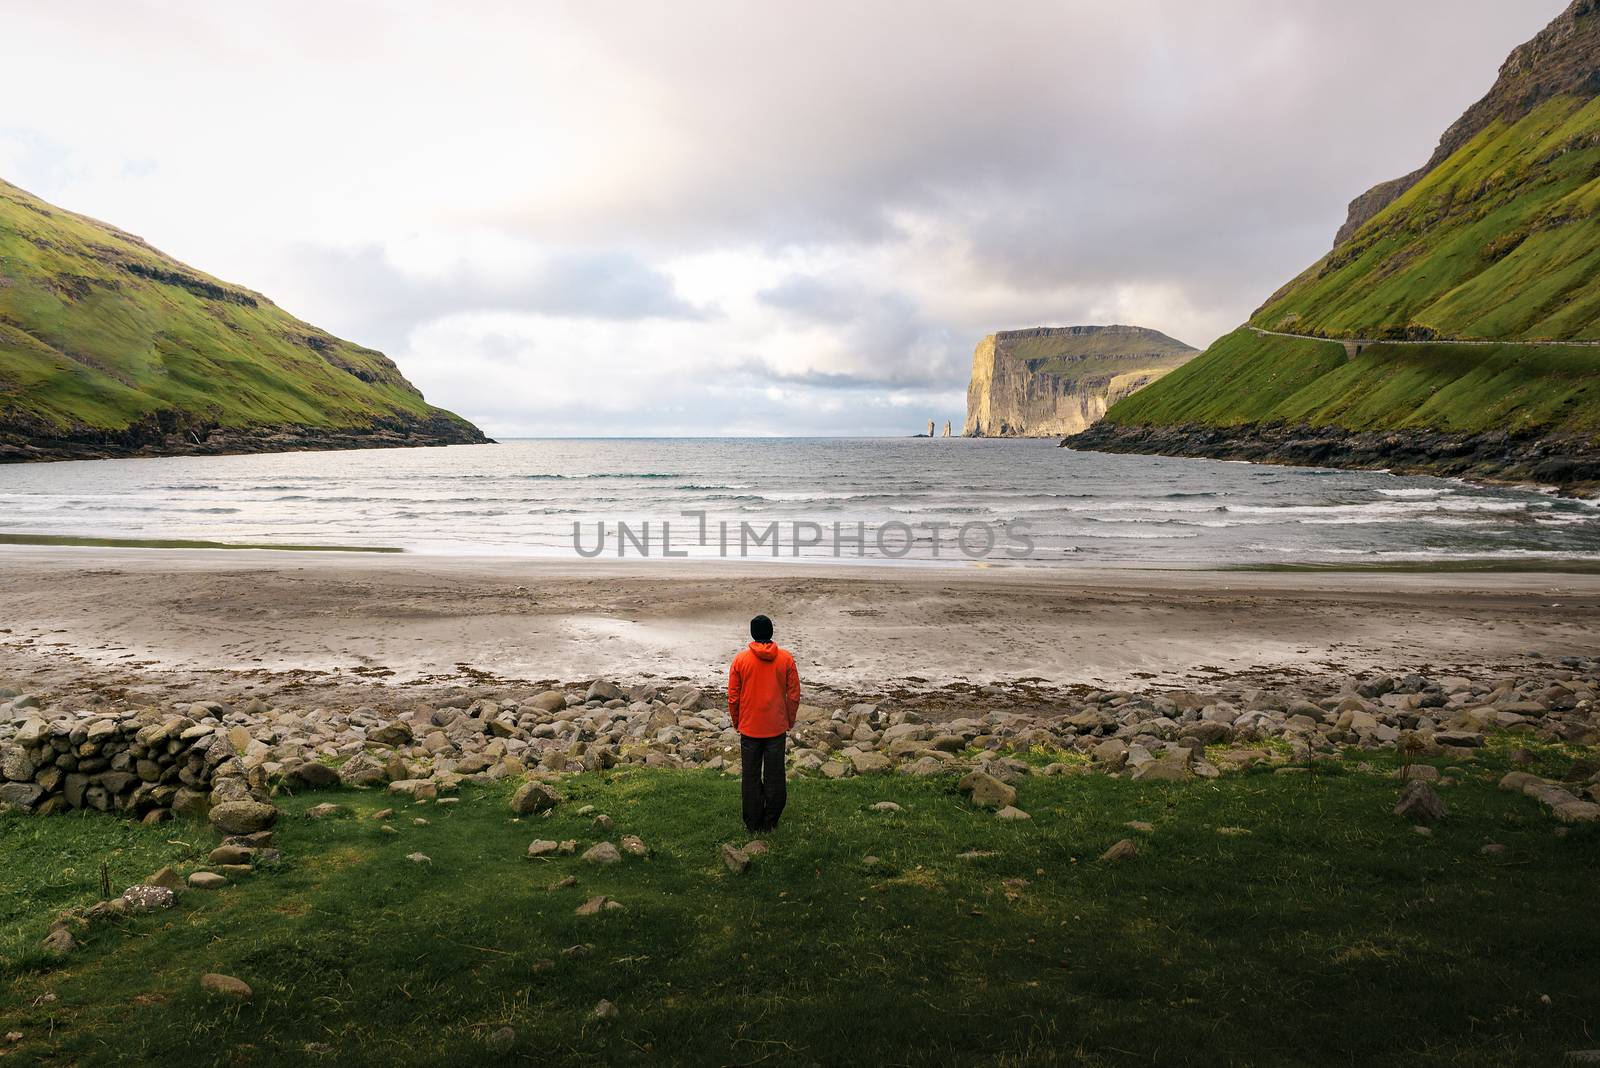 Tourist standing at the beach in Tjornuvik located on the coast of a beautiful bay in the Faroe Islands, Denmark.